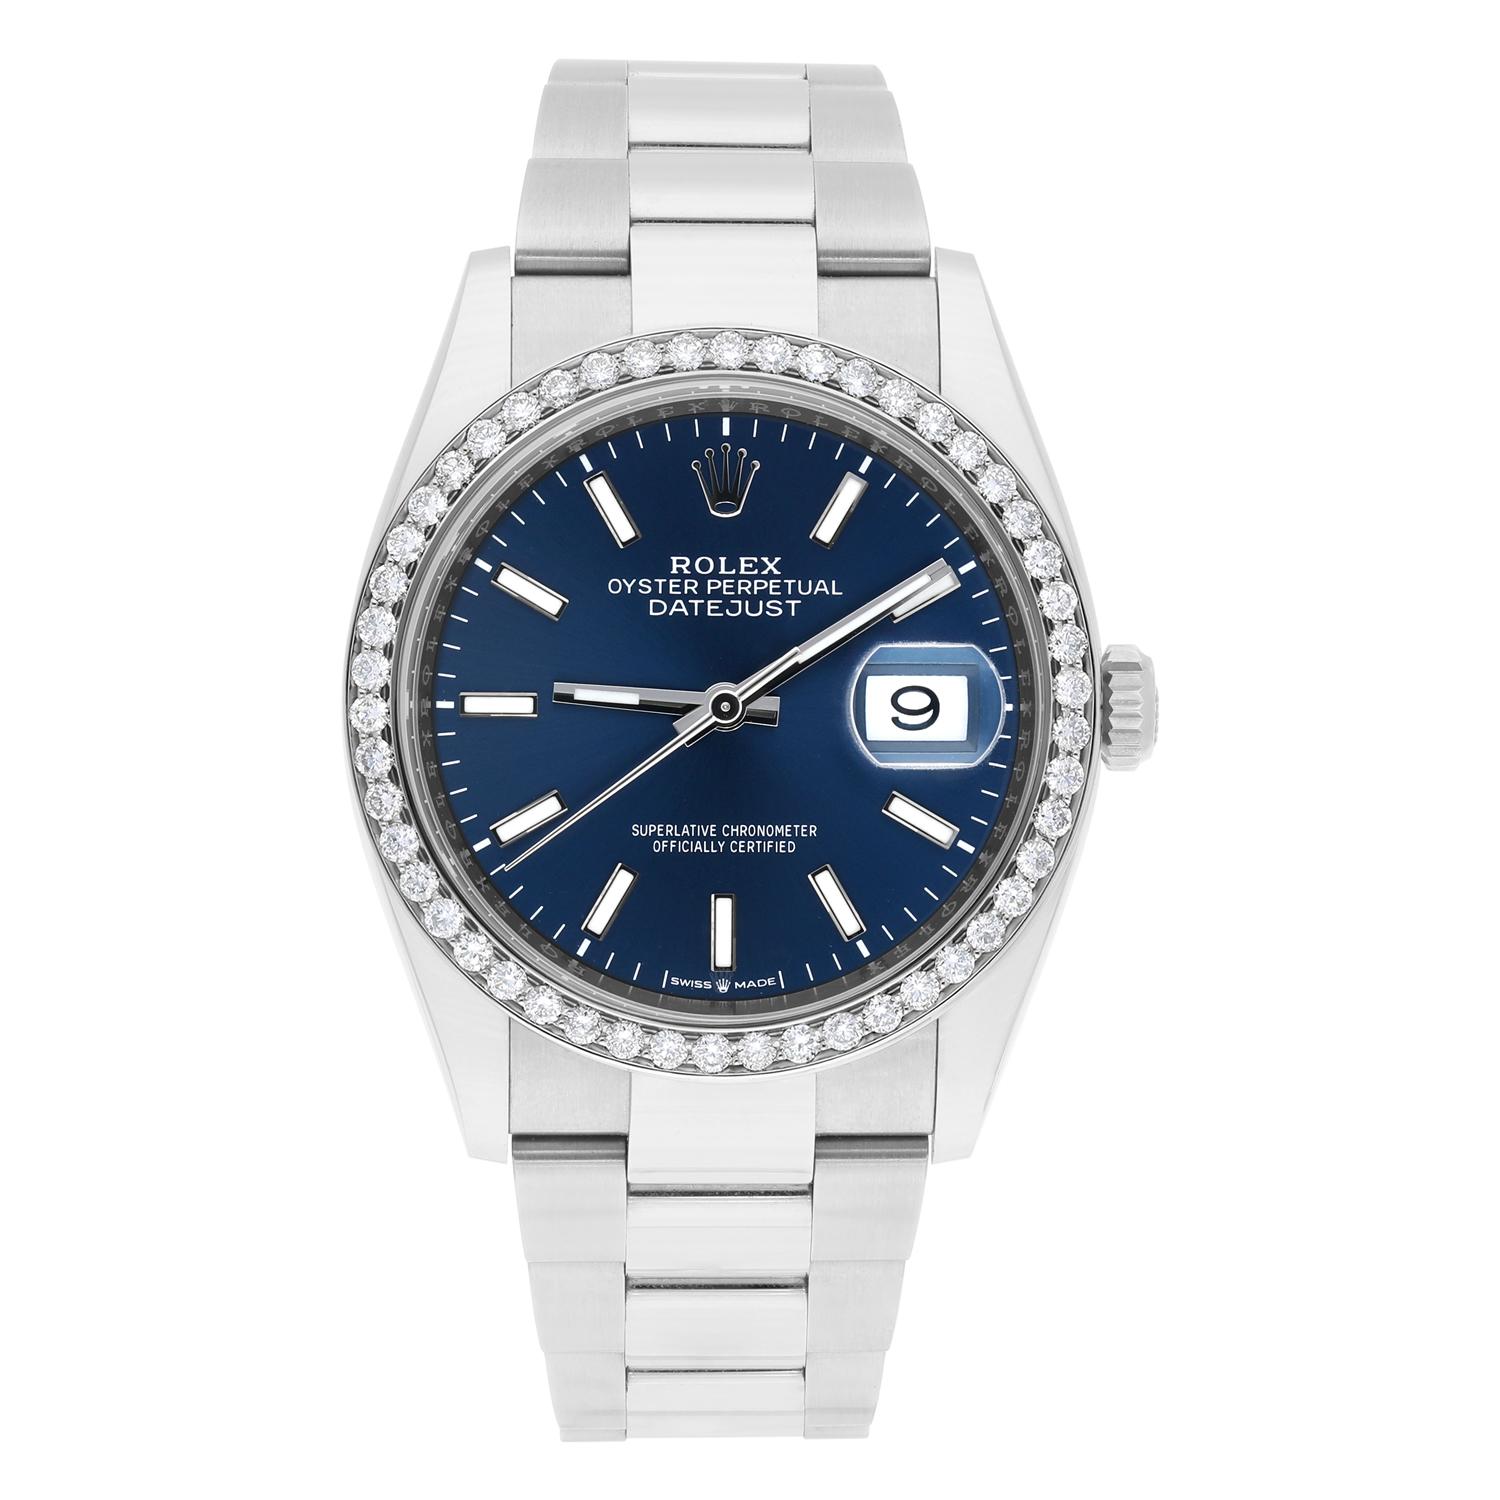 Indulge in the enduring allure of the Rolex 126200 Datejust. This 36mm masterpiece boasts a captivating blue index dial paired with the iconic Oyster bracelet, blending sophistication with versatility. Diamonds are 100% natural added